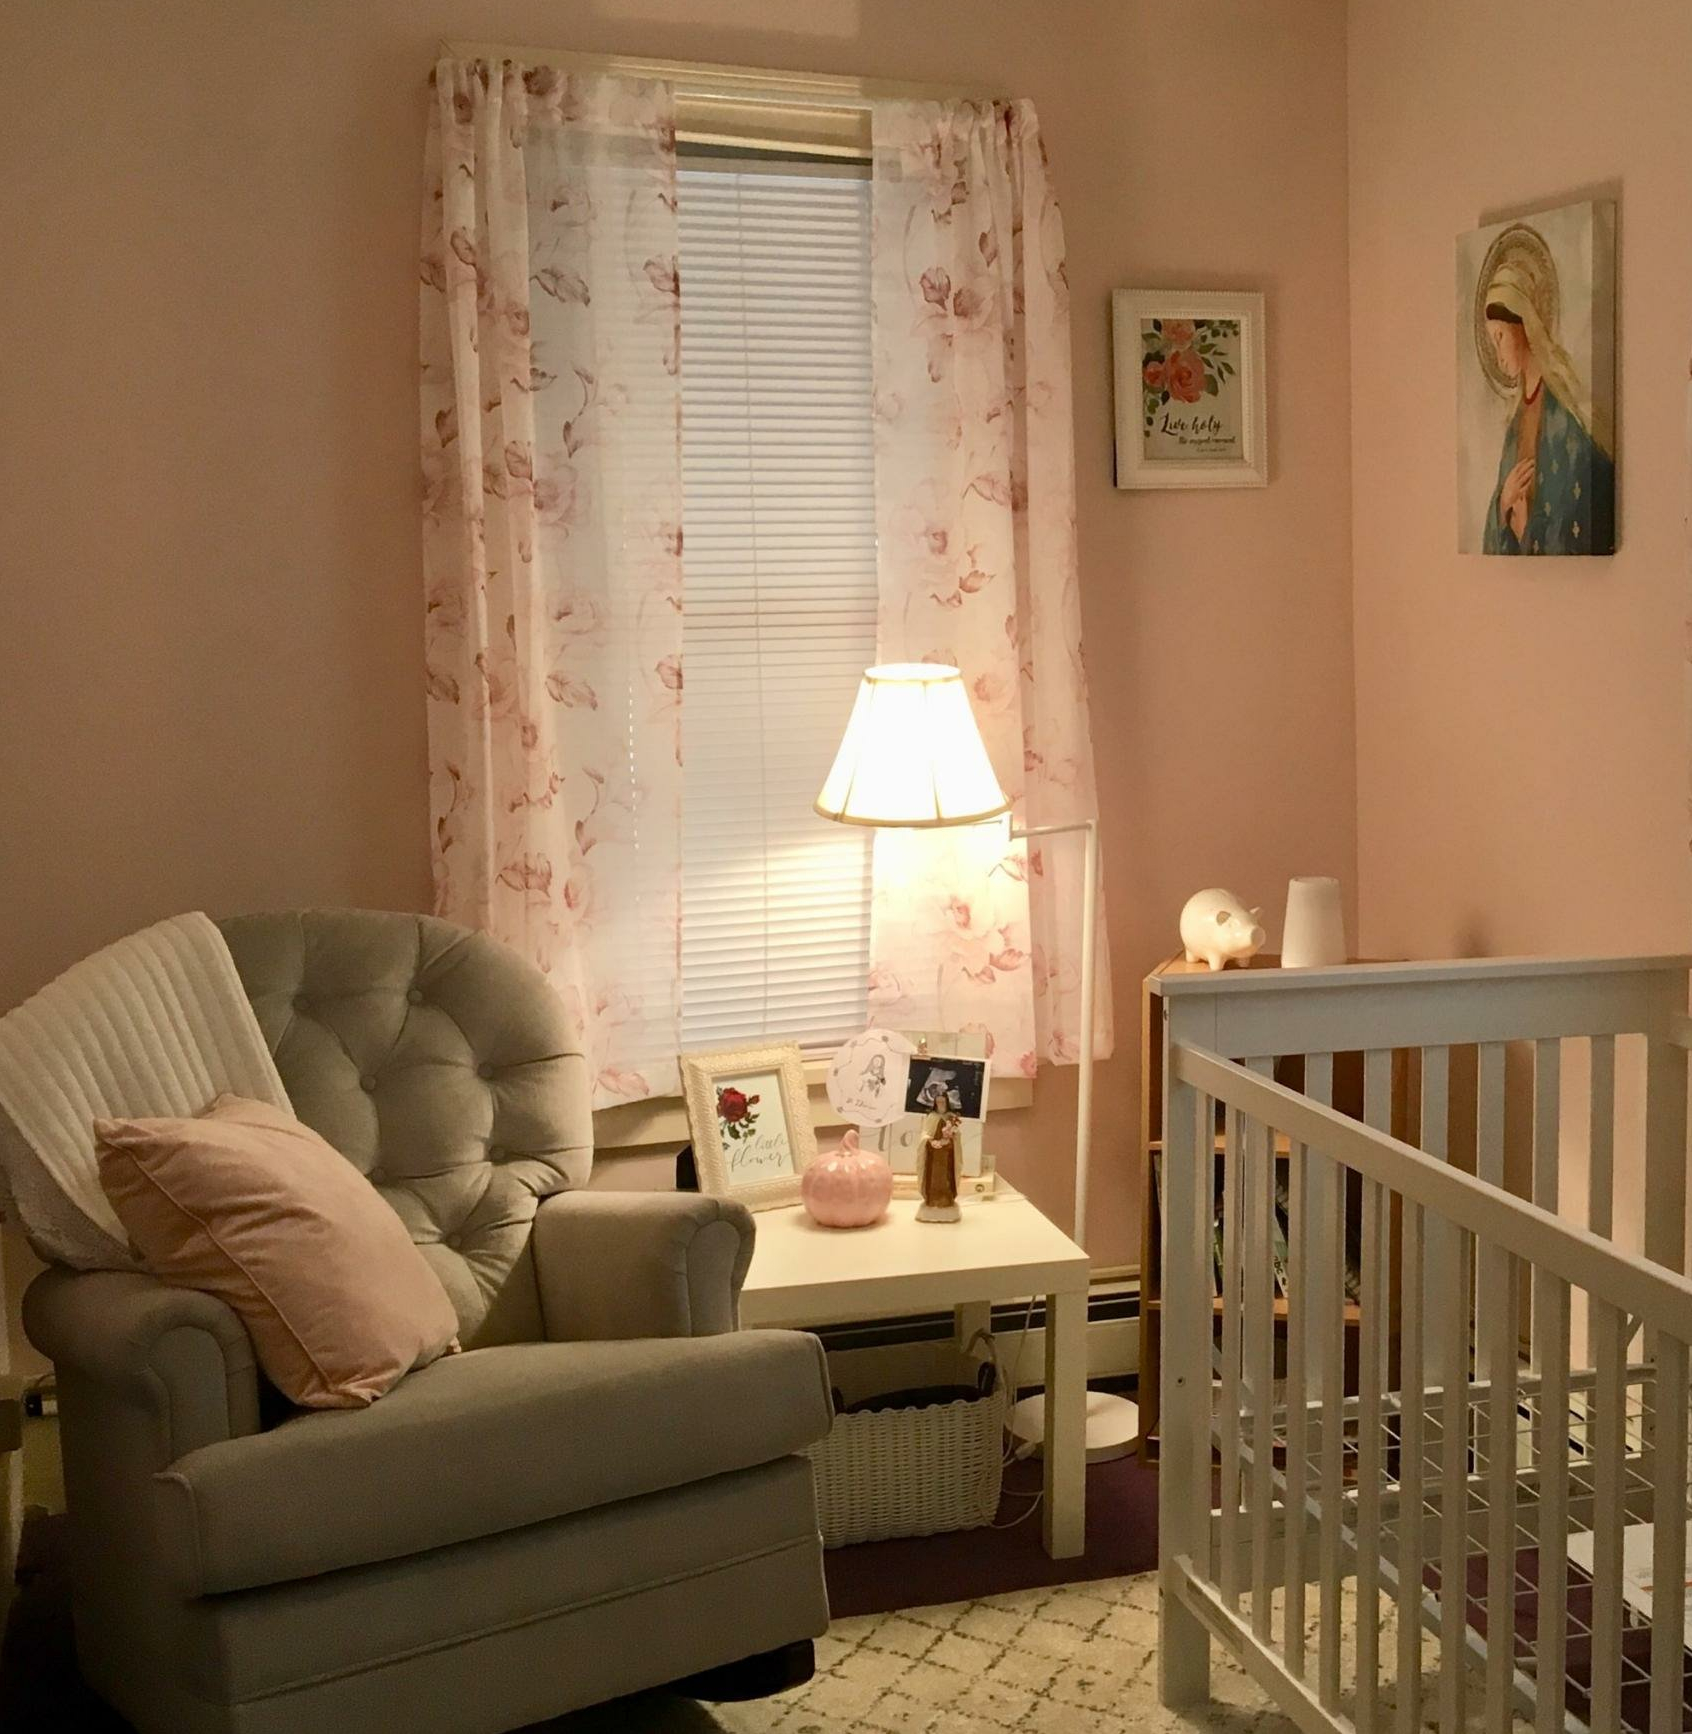 Baby Flame's Nursery - Brought to You by Katie